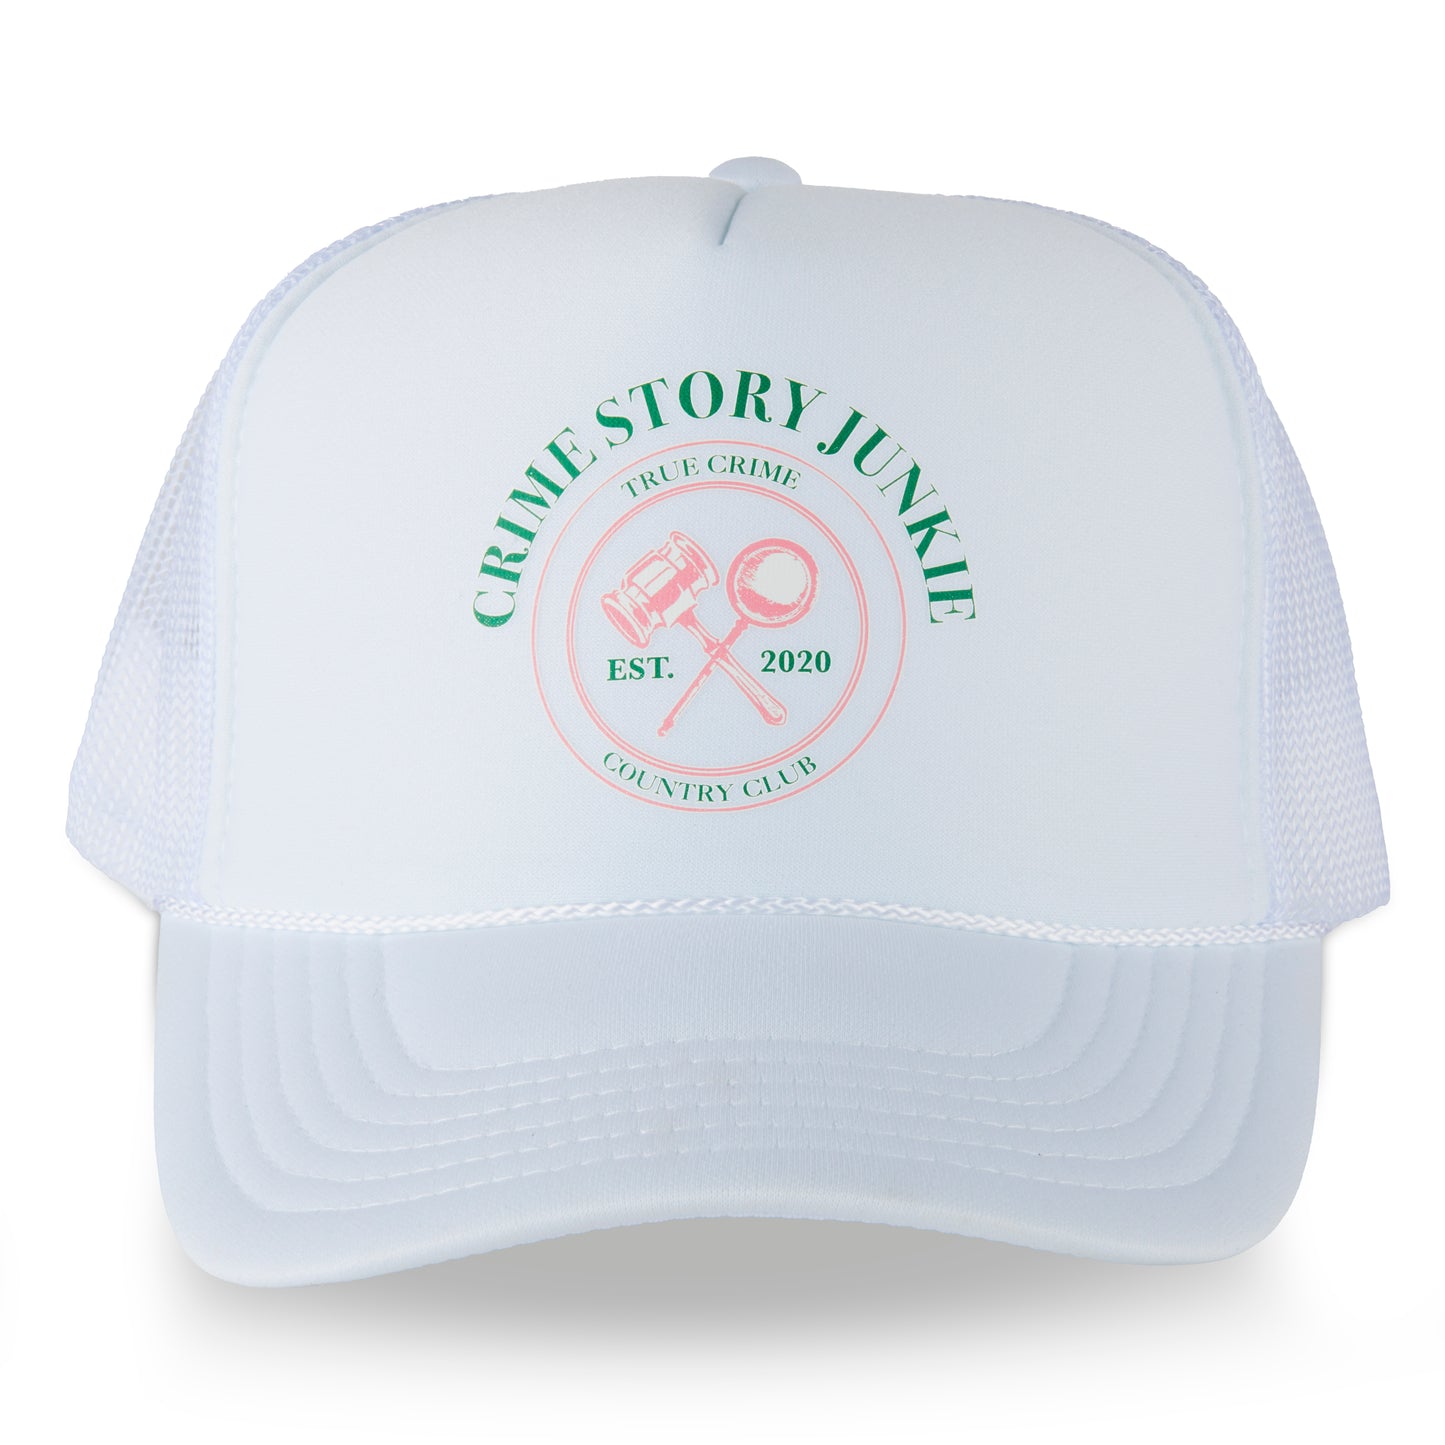 Crime Story Country Club White Trucker Hat